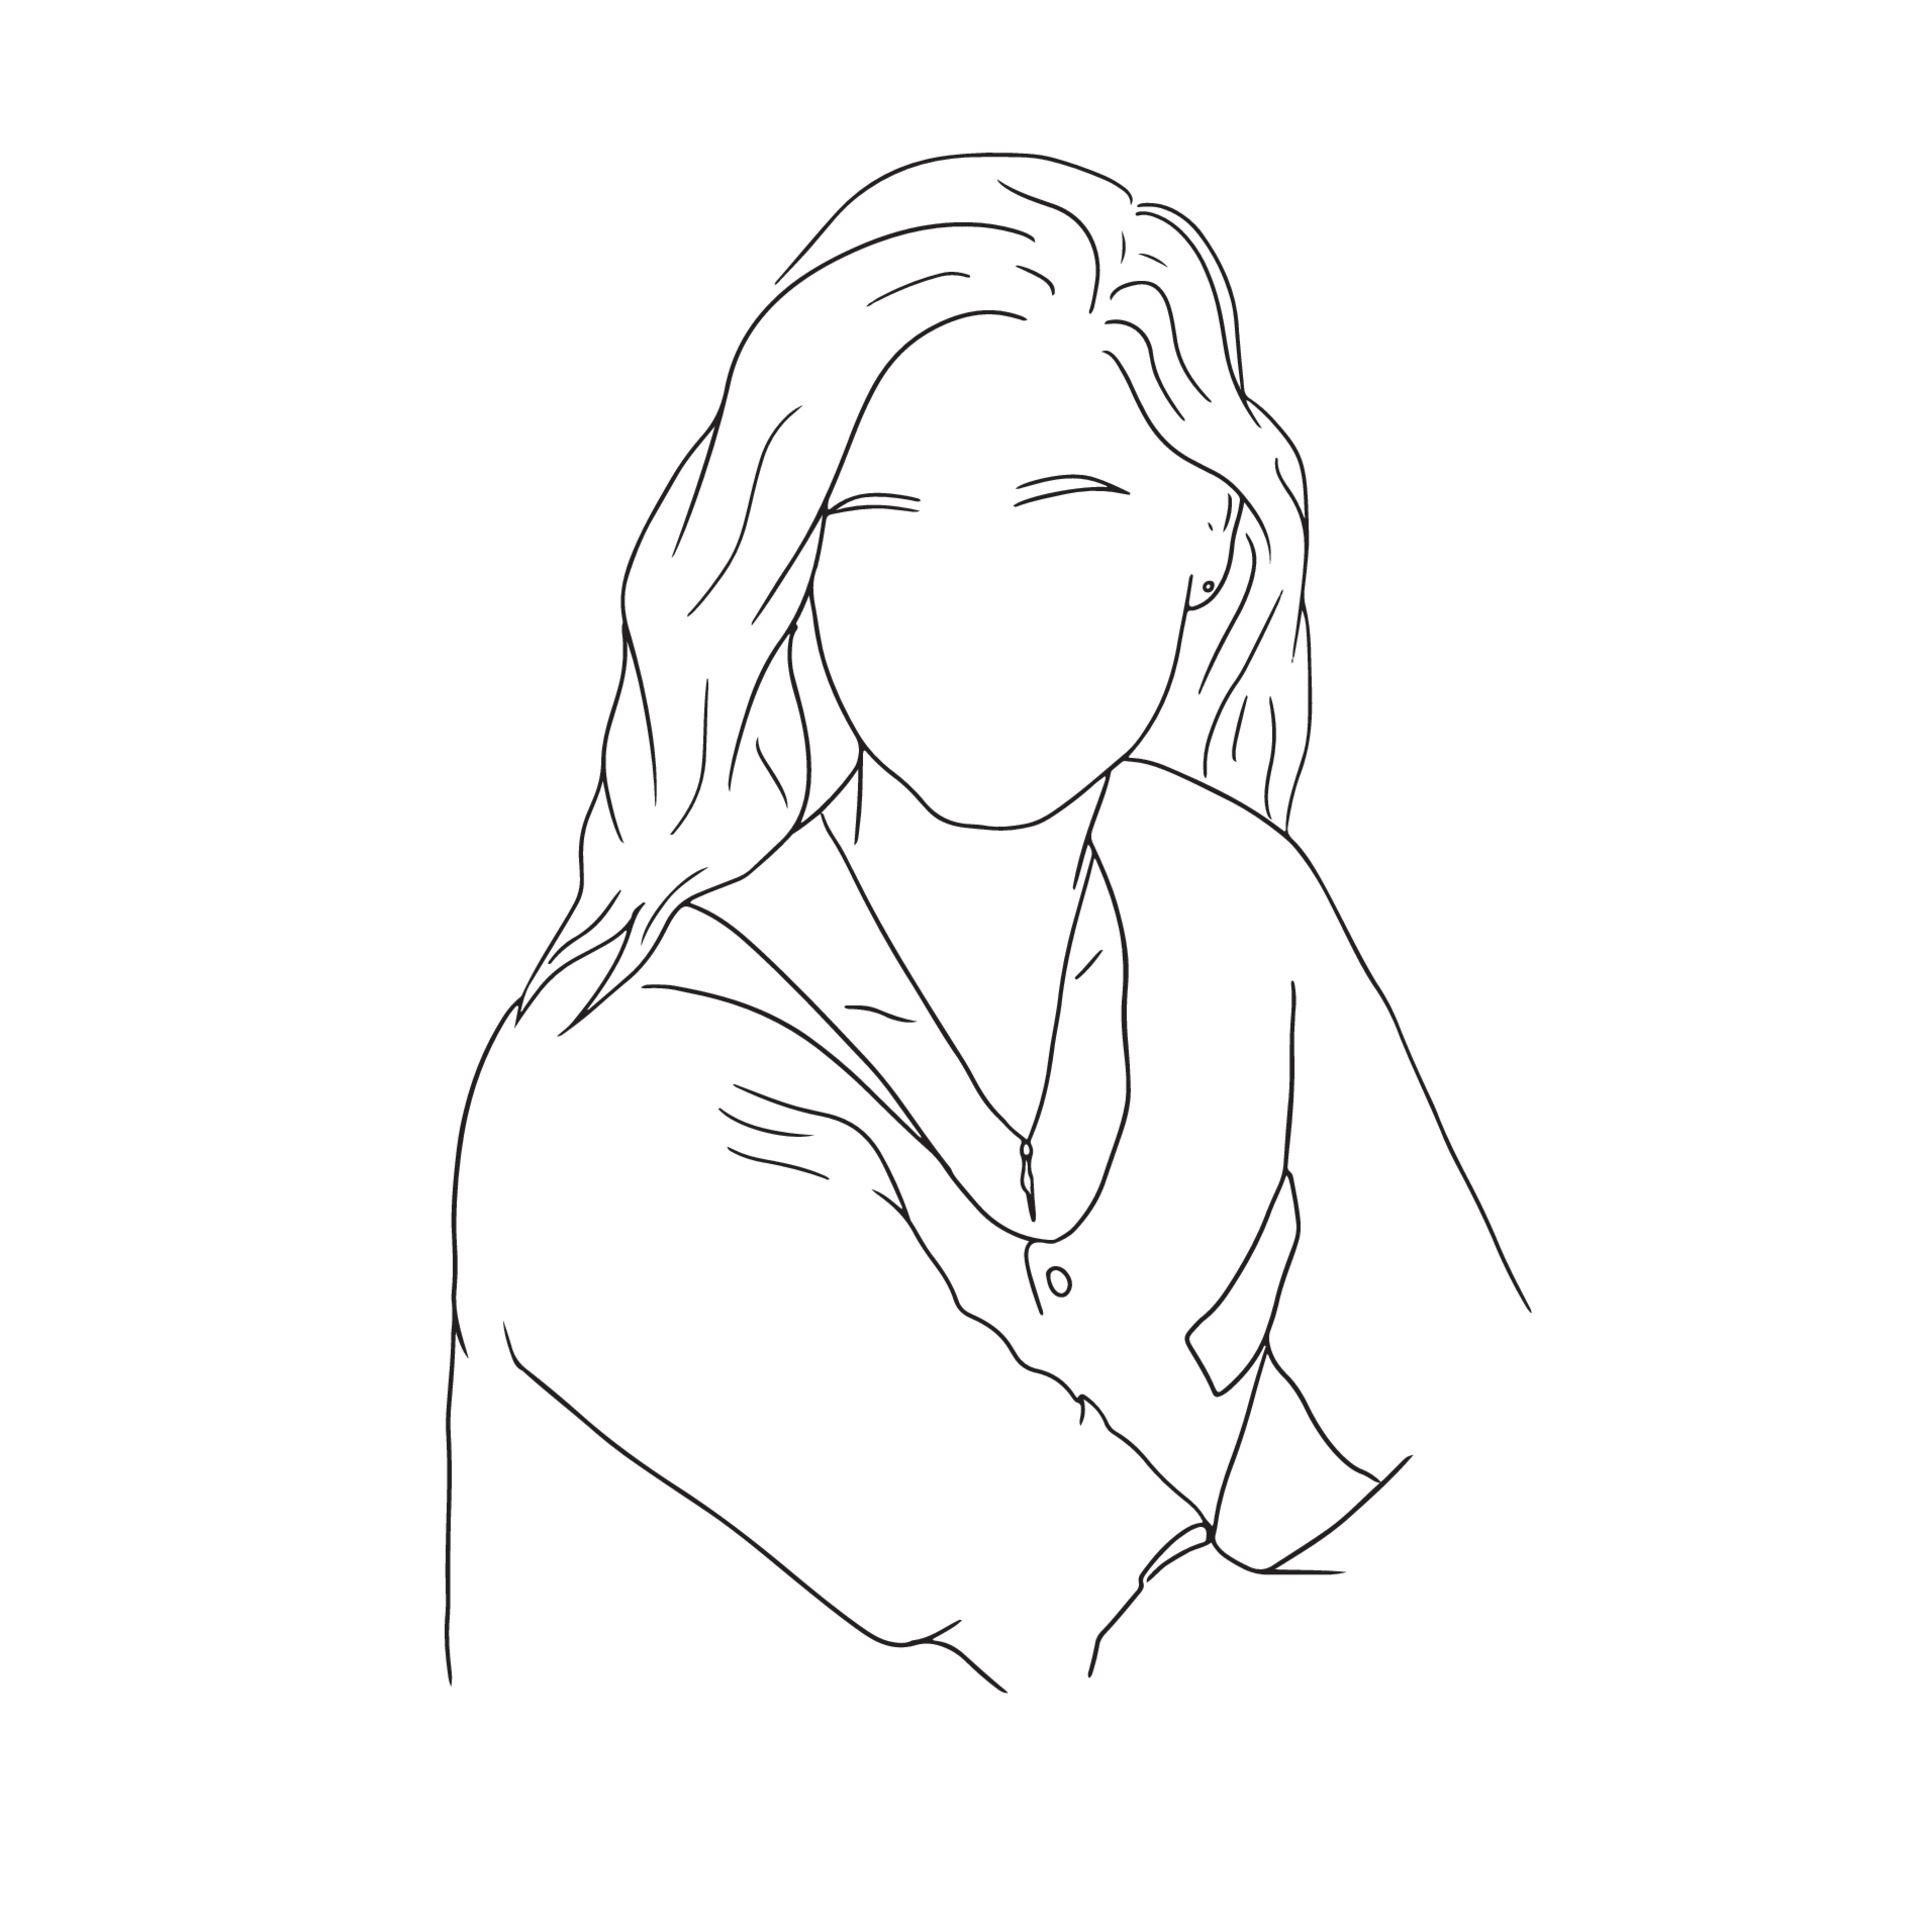 Graphics drawing outline woman standing Royalty Free Vector